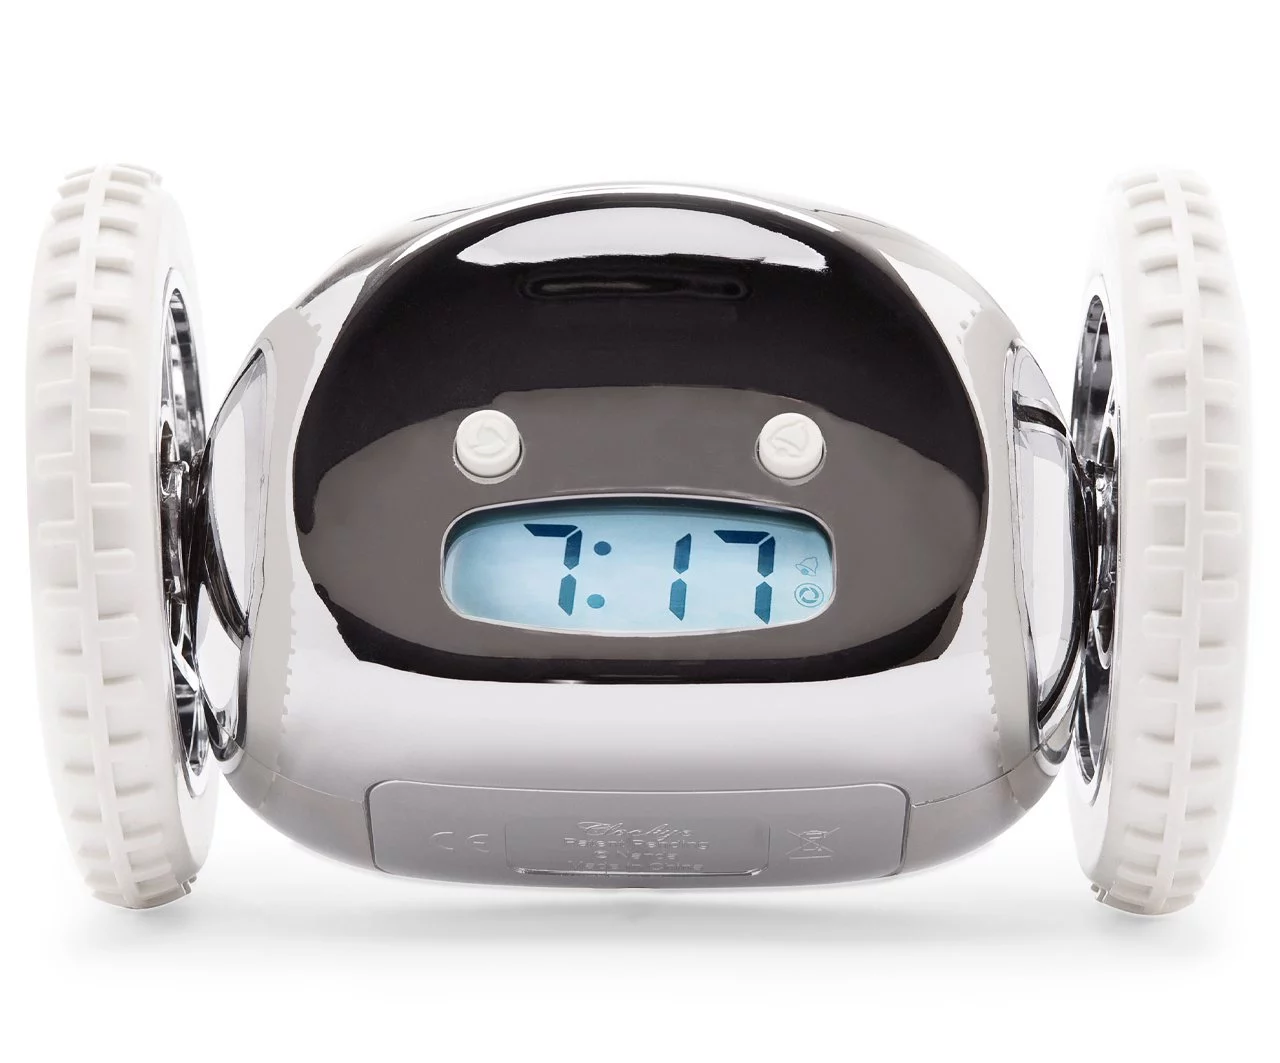 Cool Gifts For Teens 2022: Clocky Alarm Clock 2022